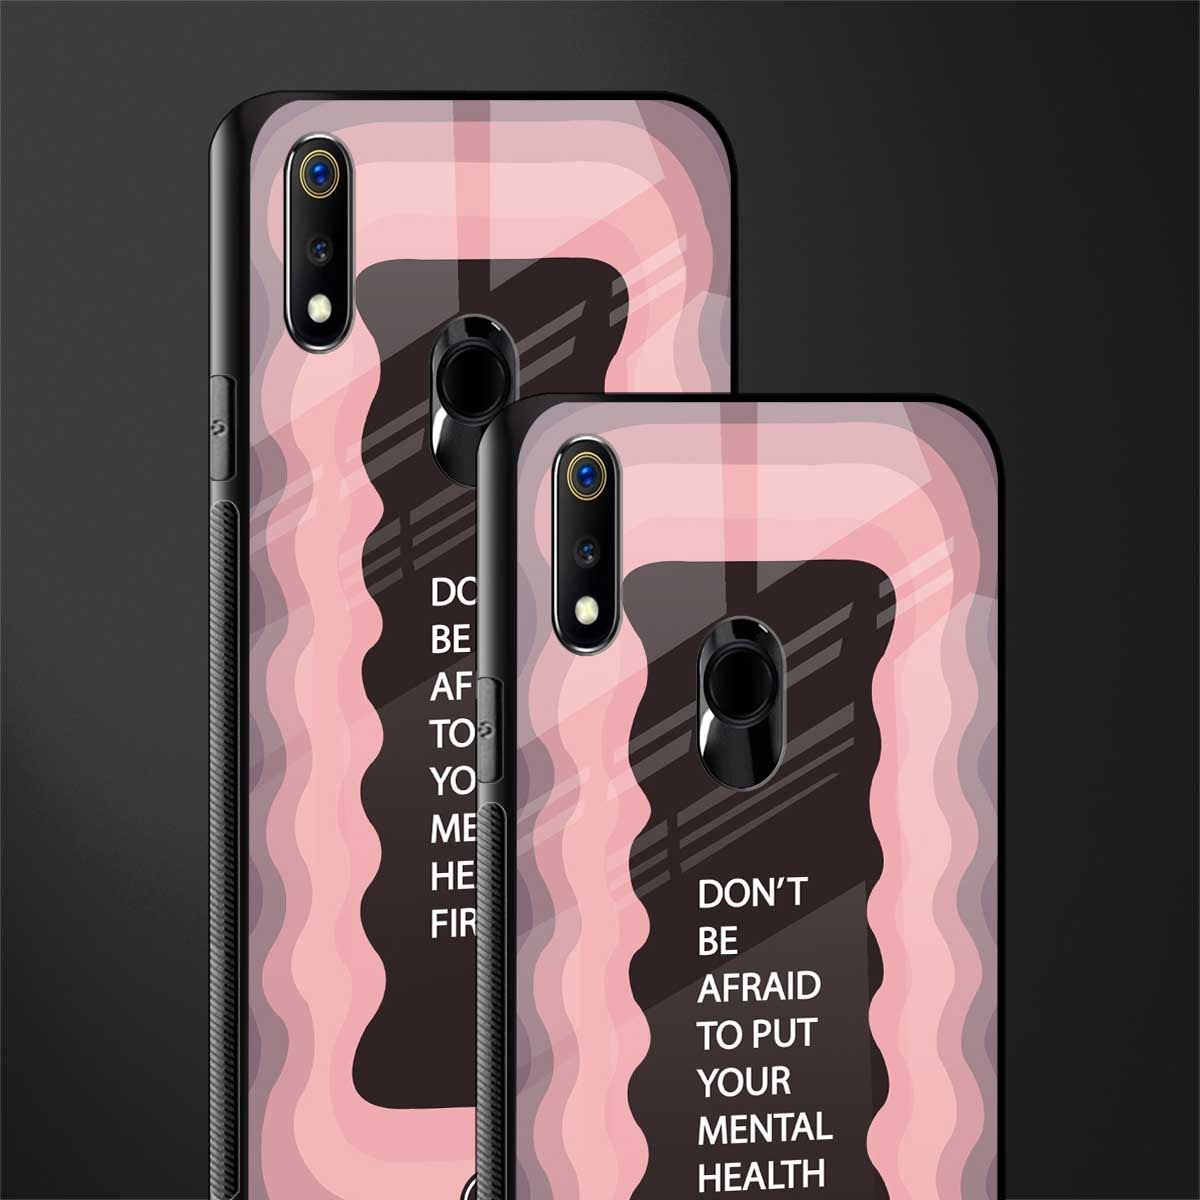 mental health first glass case for realme 3